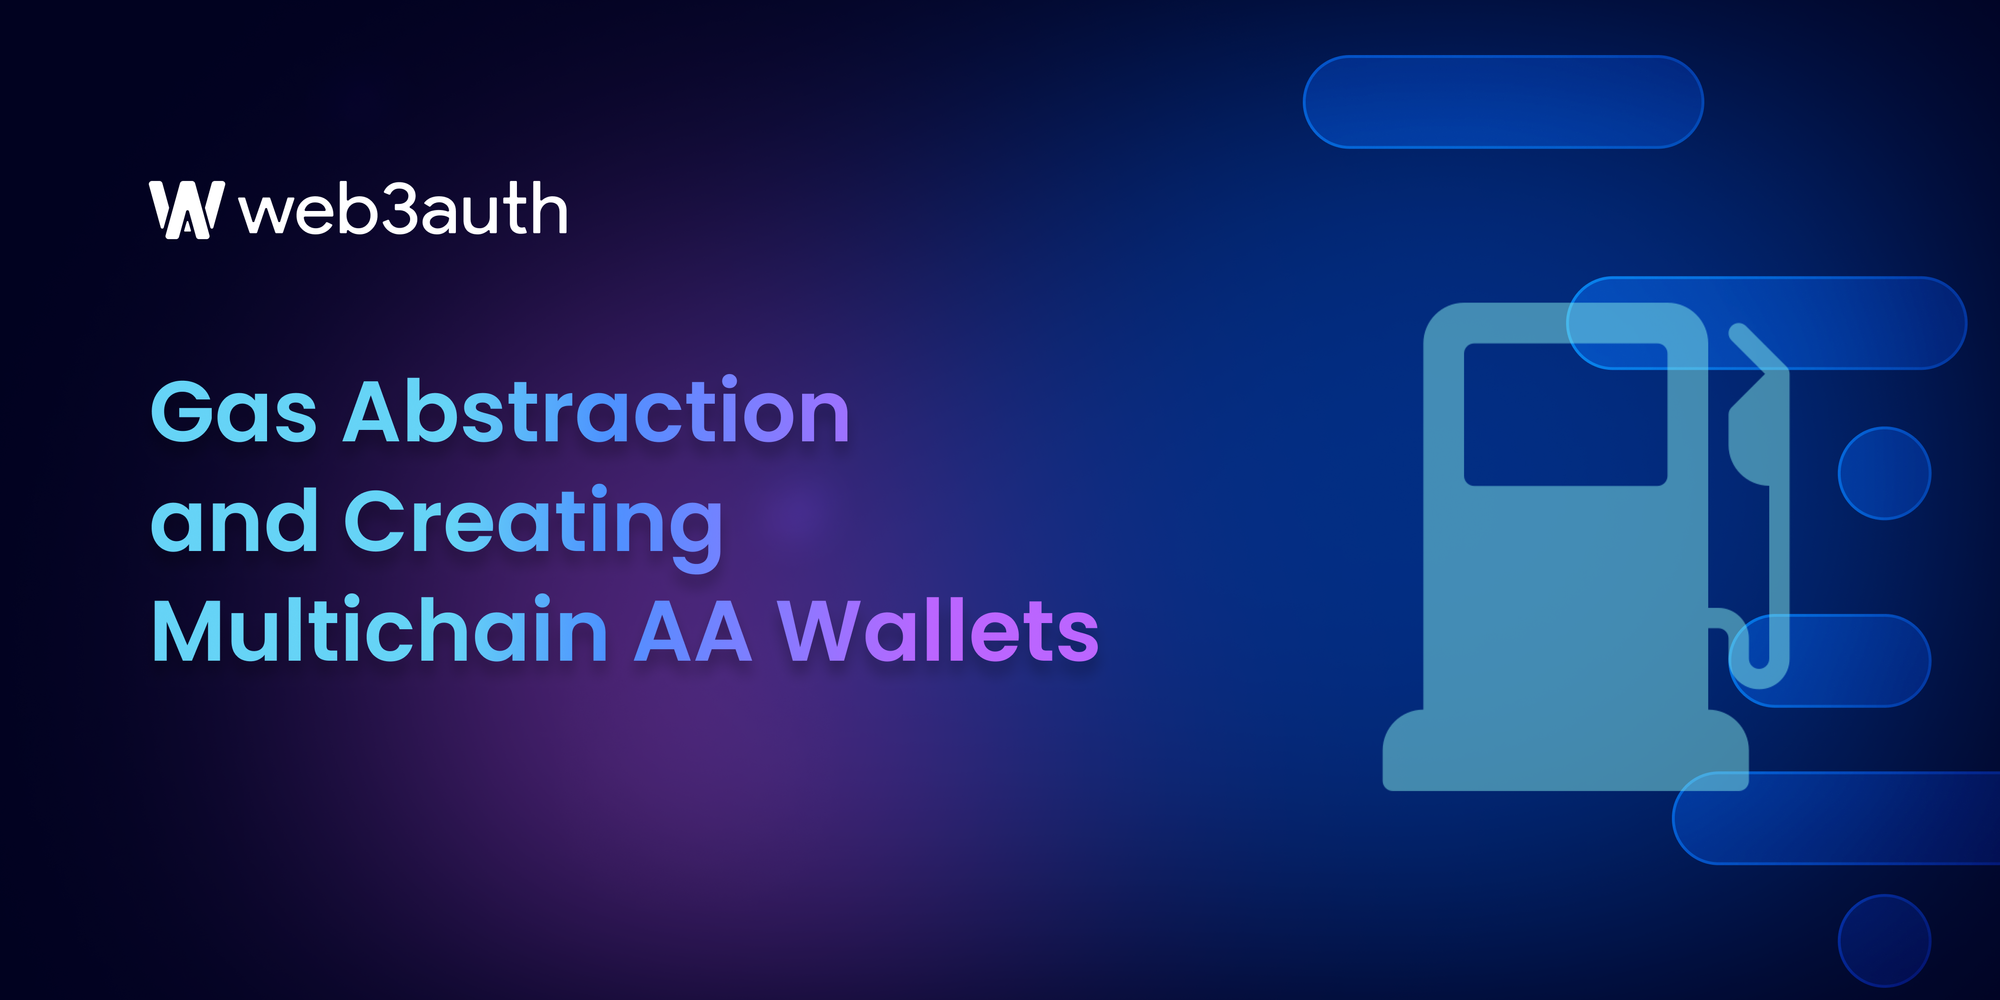 Gas Abstraction and Creating Multichain AA Wallets